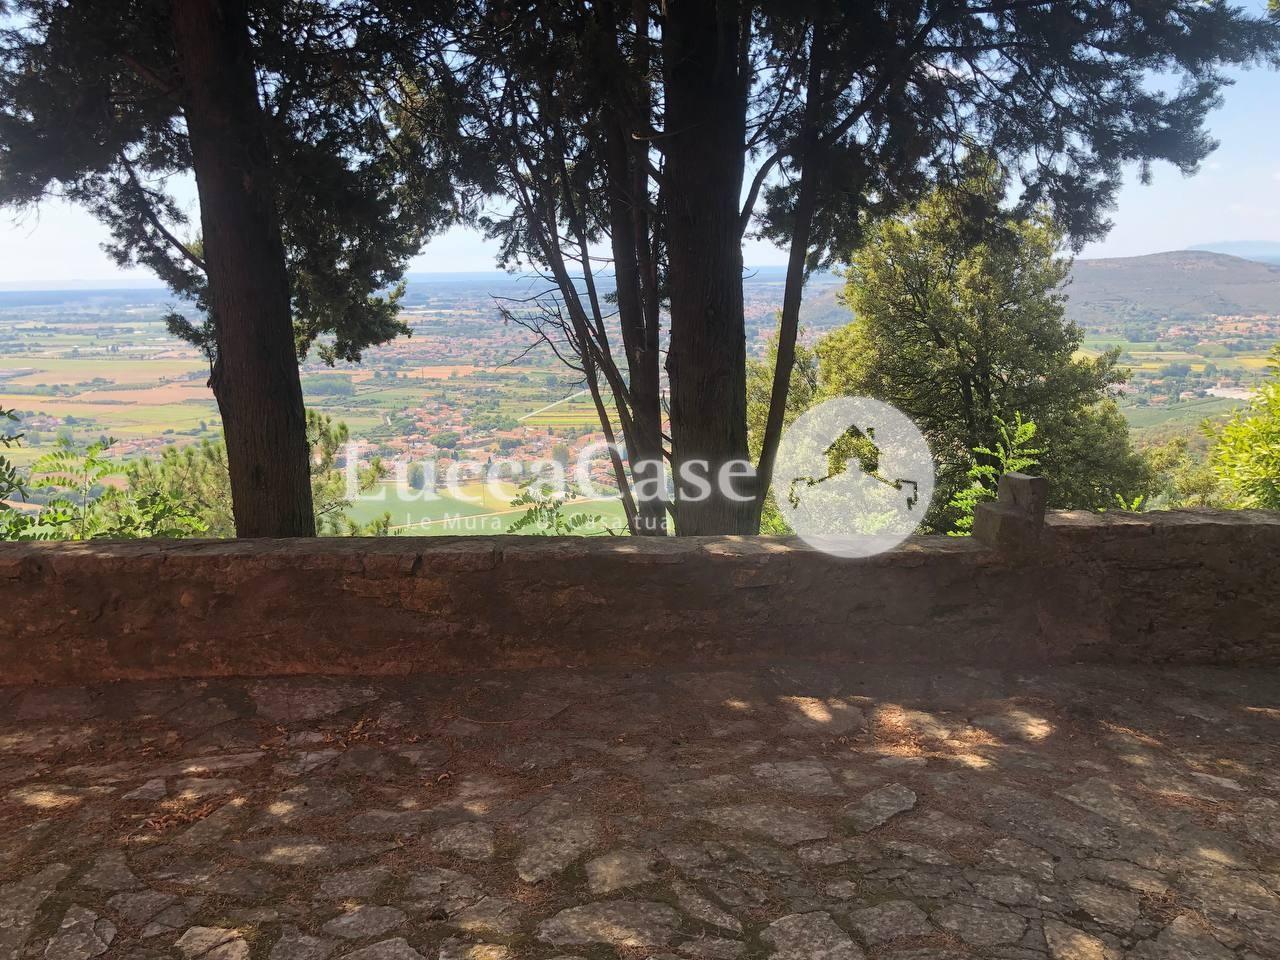 Country house for sale in San Giuliano Terme (PI)